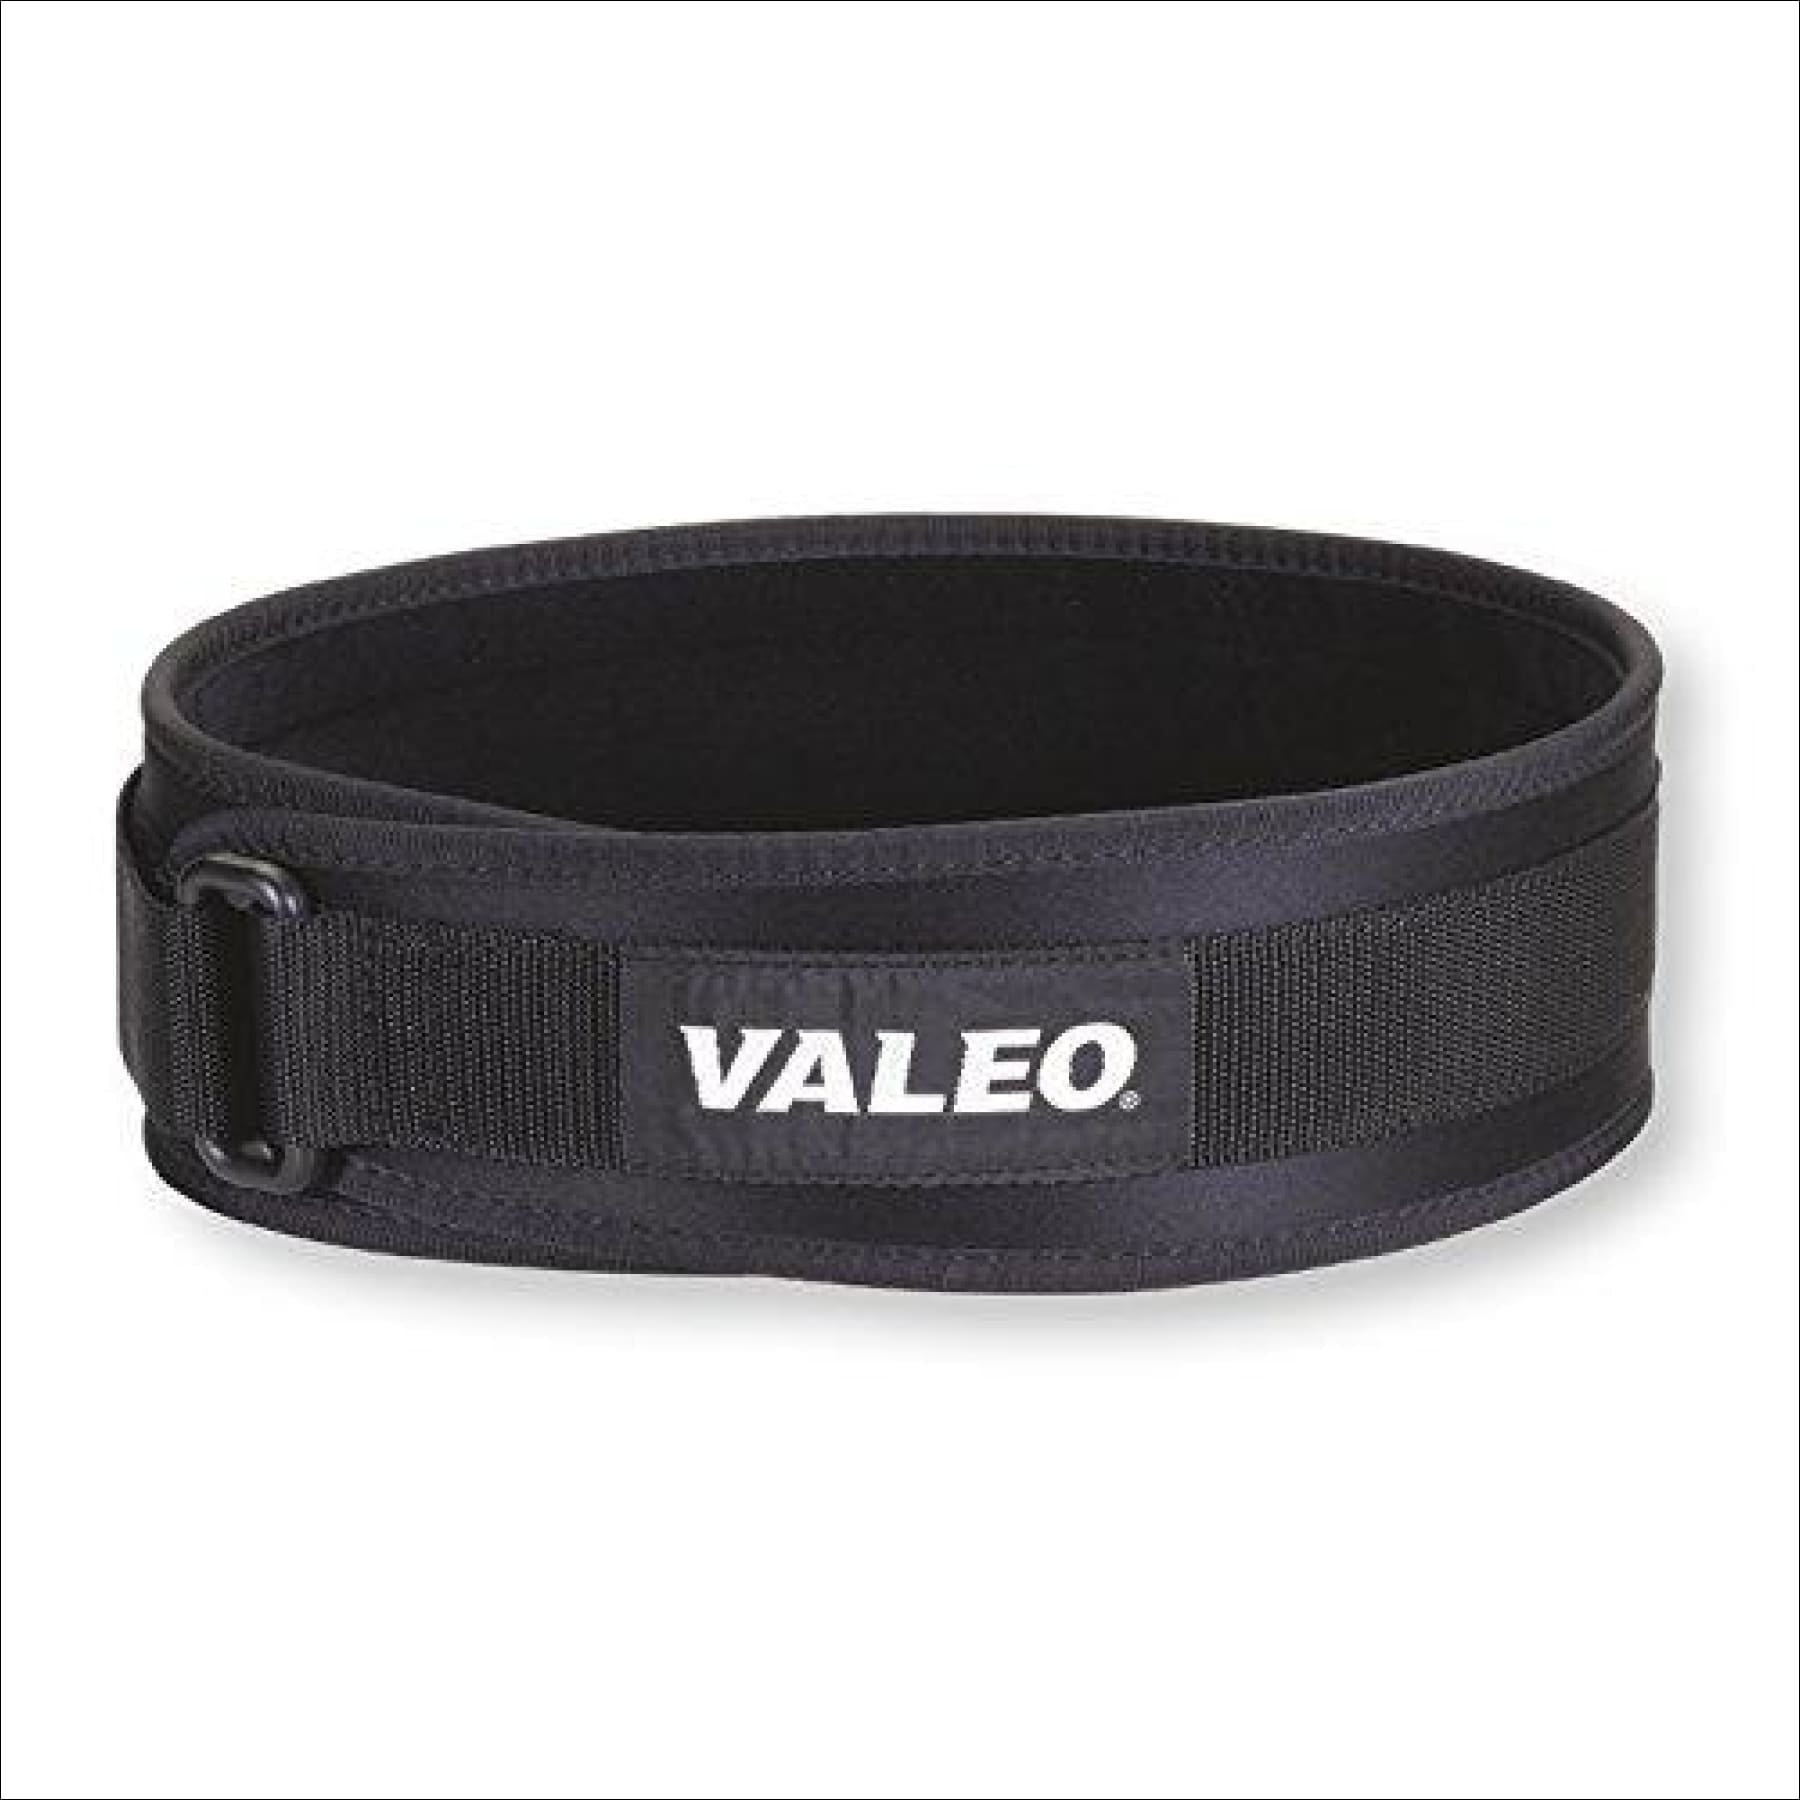 Valeo 4-Inch VLP Performance Low Profile Belt With Waterproof Foam Core And Low Profile Torque Ring Closure 